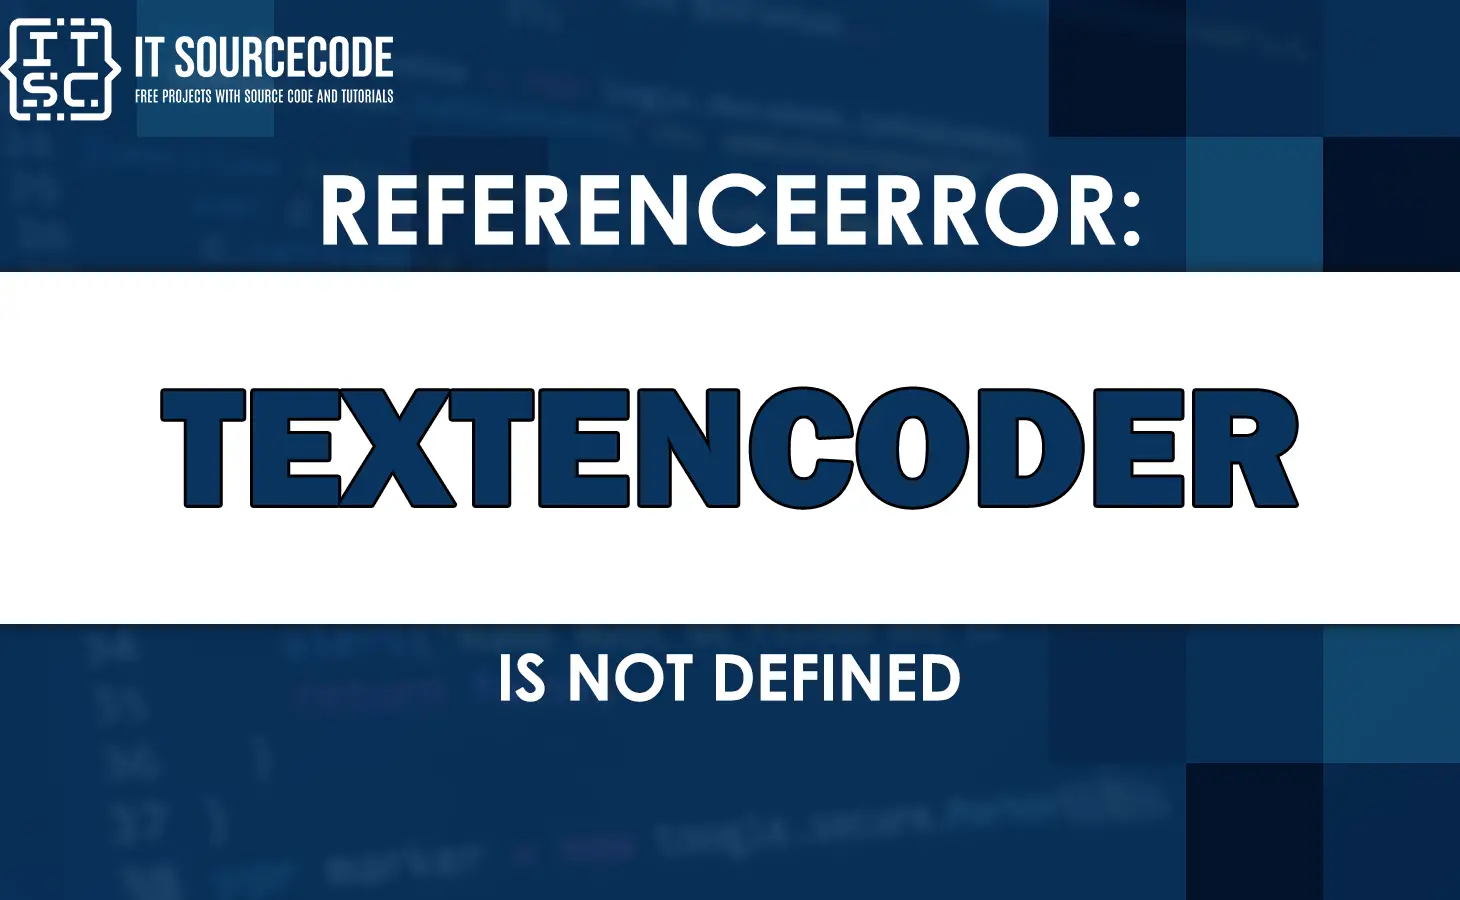 Referenceerror: Textencoder Is Not Defined [Solved]